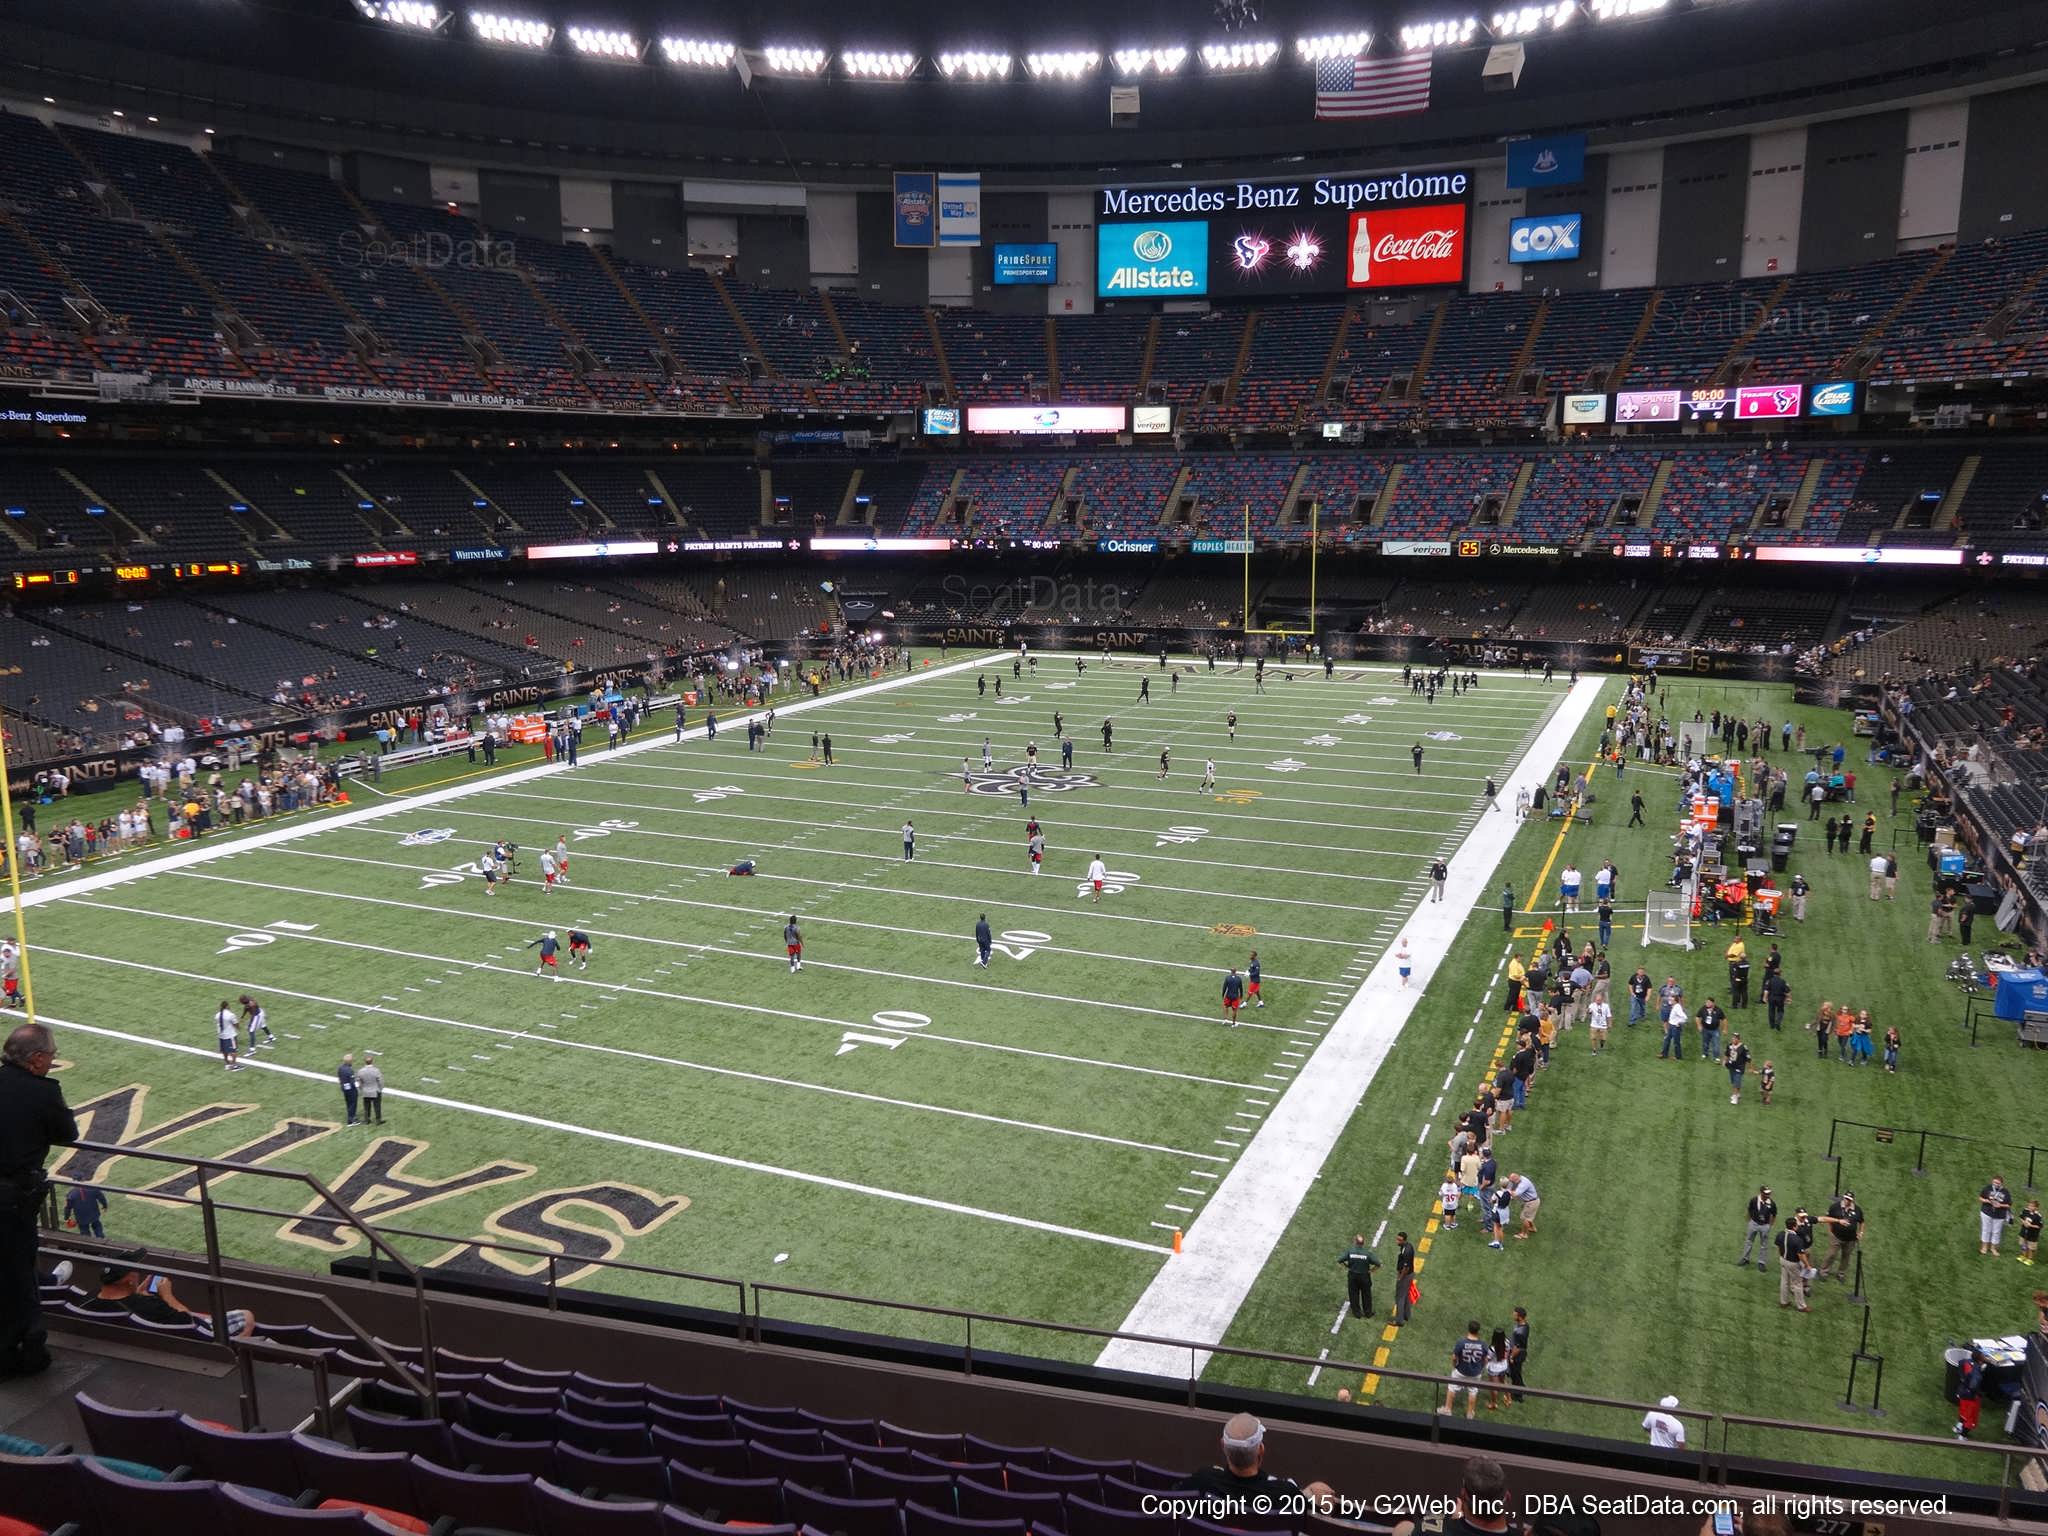 Seat view from section 345 at the Mercedes-Benz Superdome, home of the New Orleans Saints